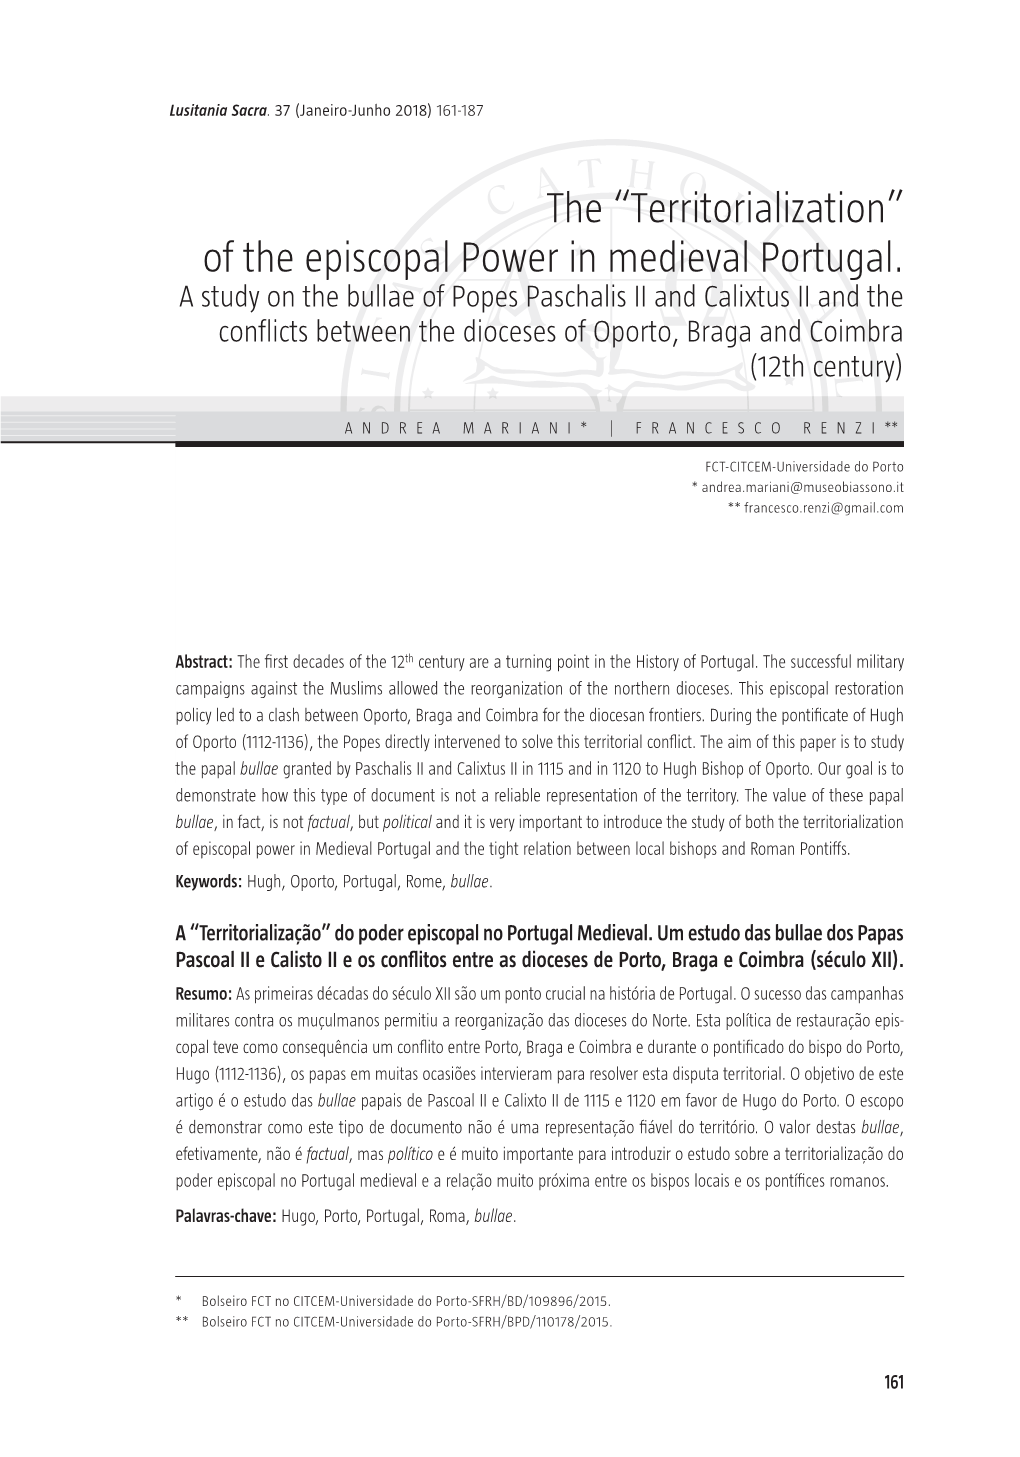 Of the Episcopal Power in Medieval Portugal